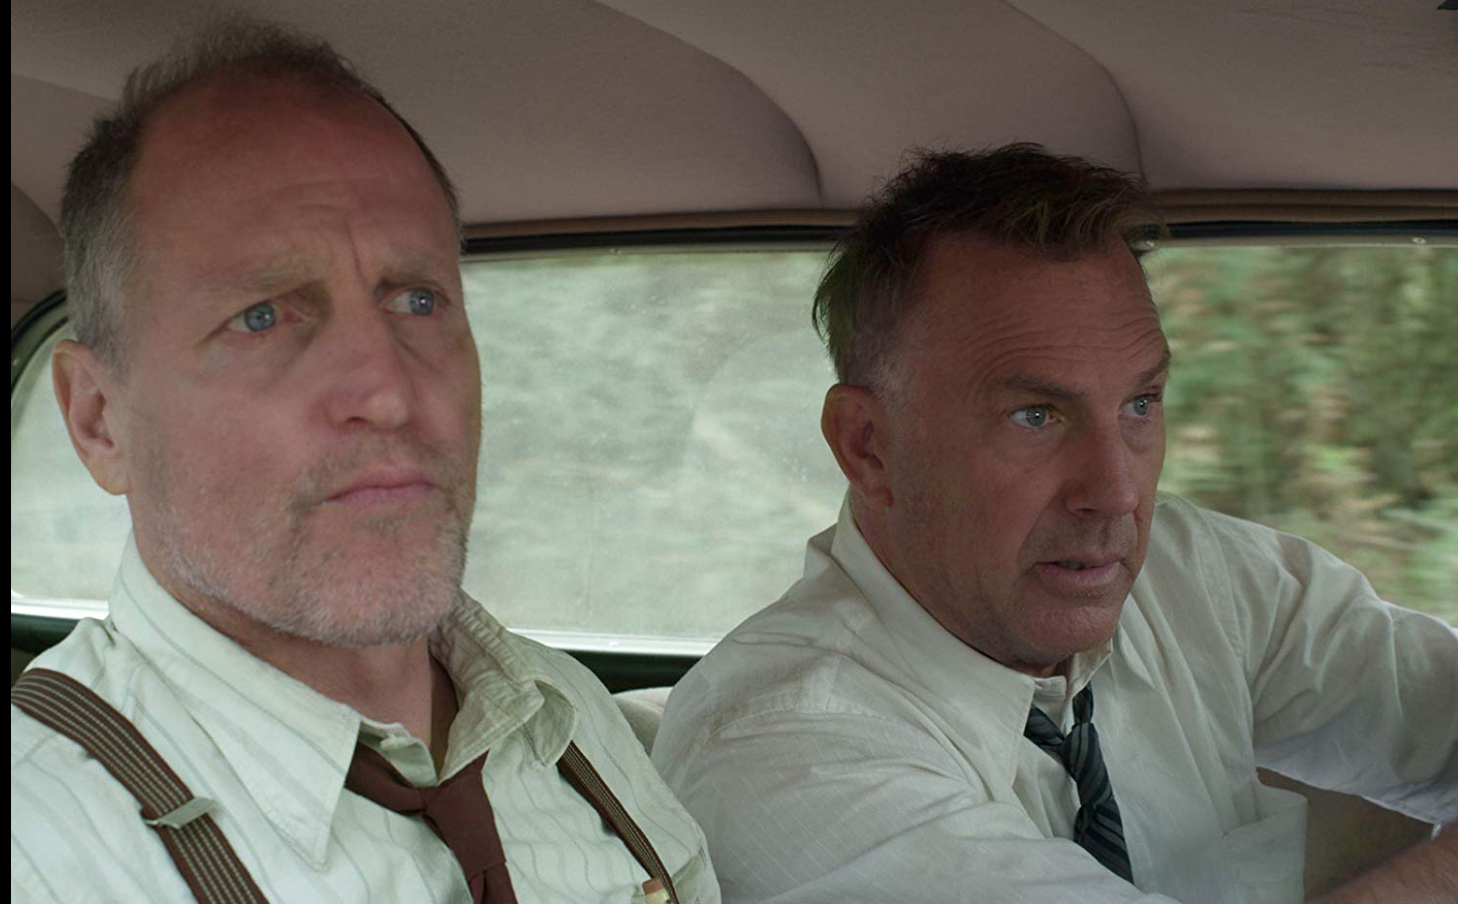 Woody Harrelson and Kevin Costner, right, in a scene from the trailer on IMDB.com for "The Highwaymen." (IMDB)